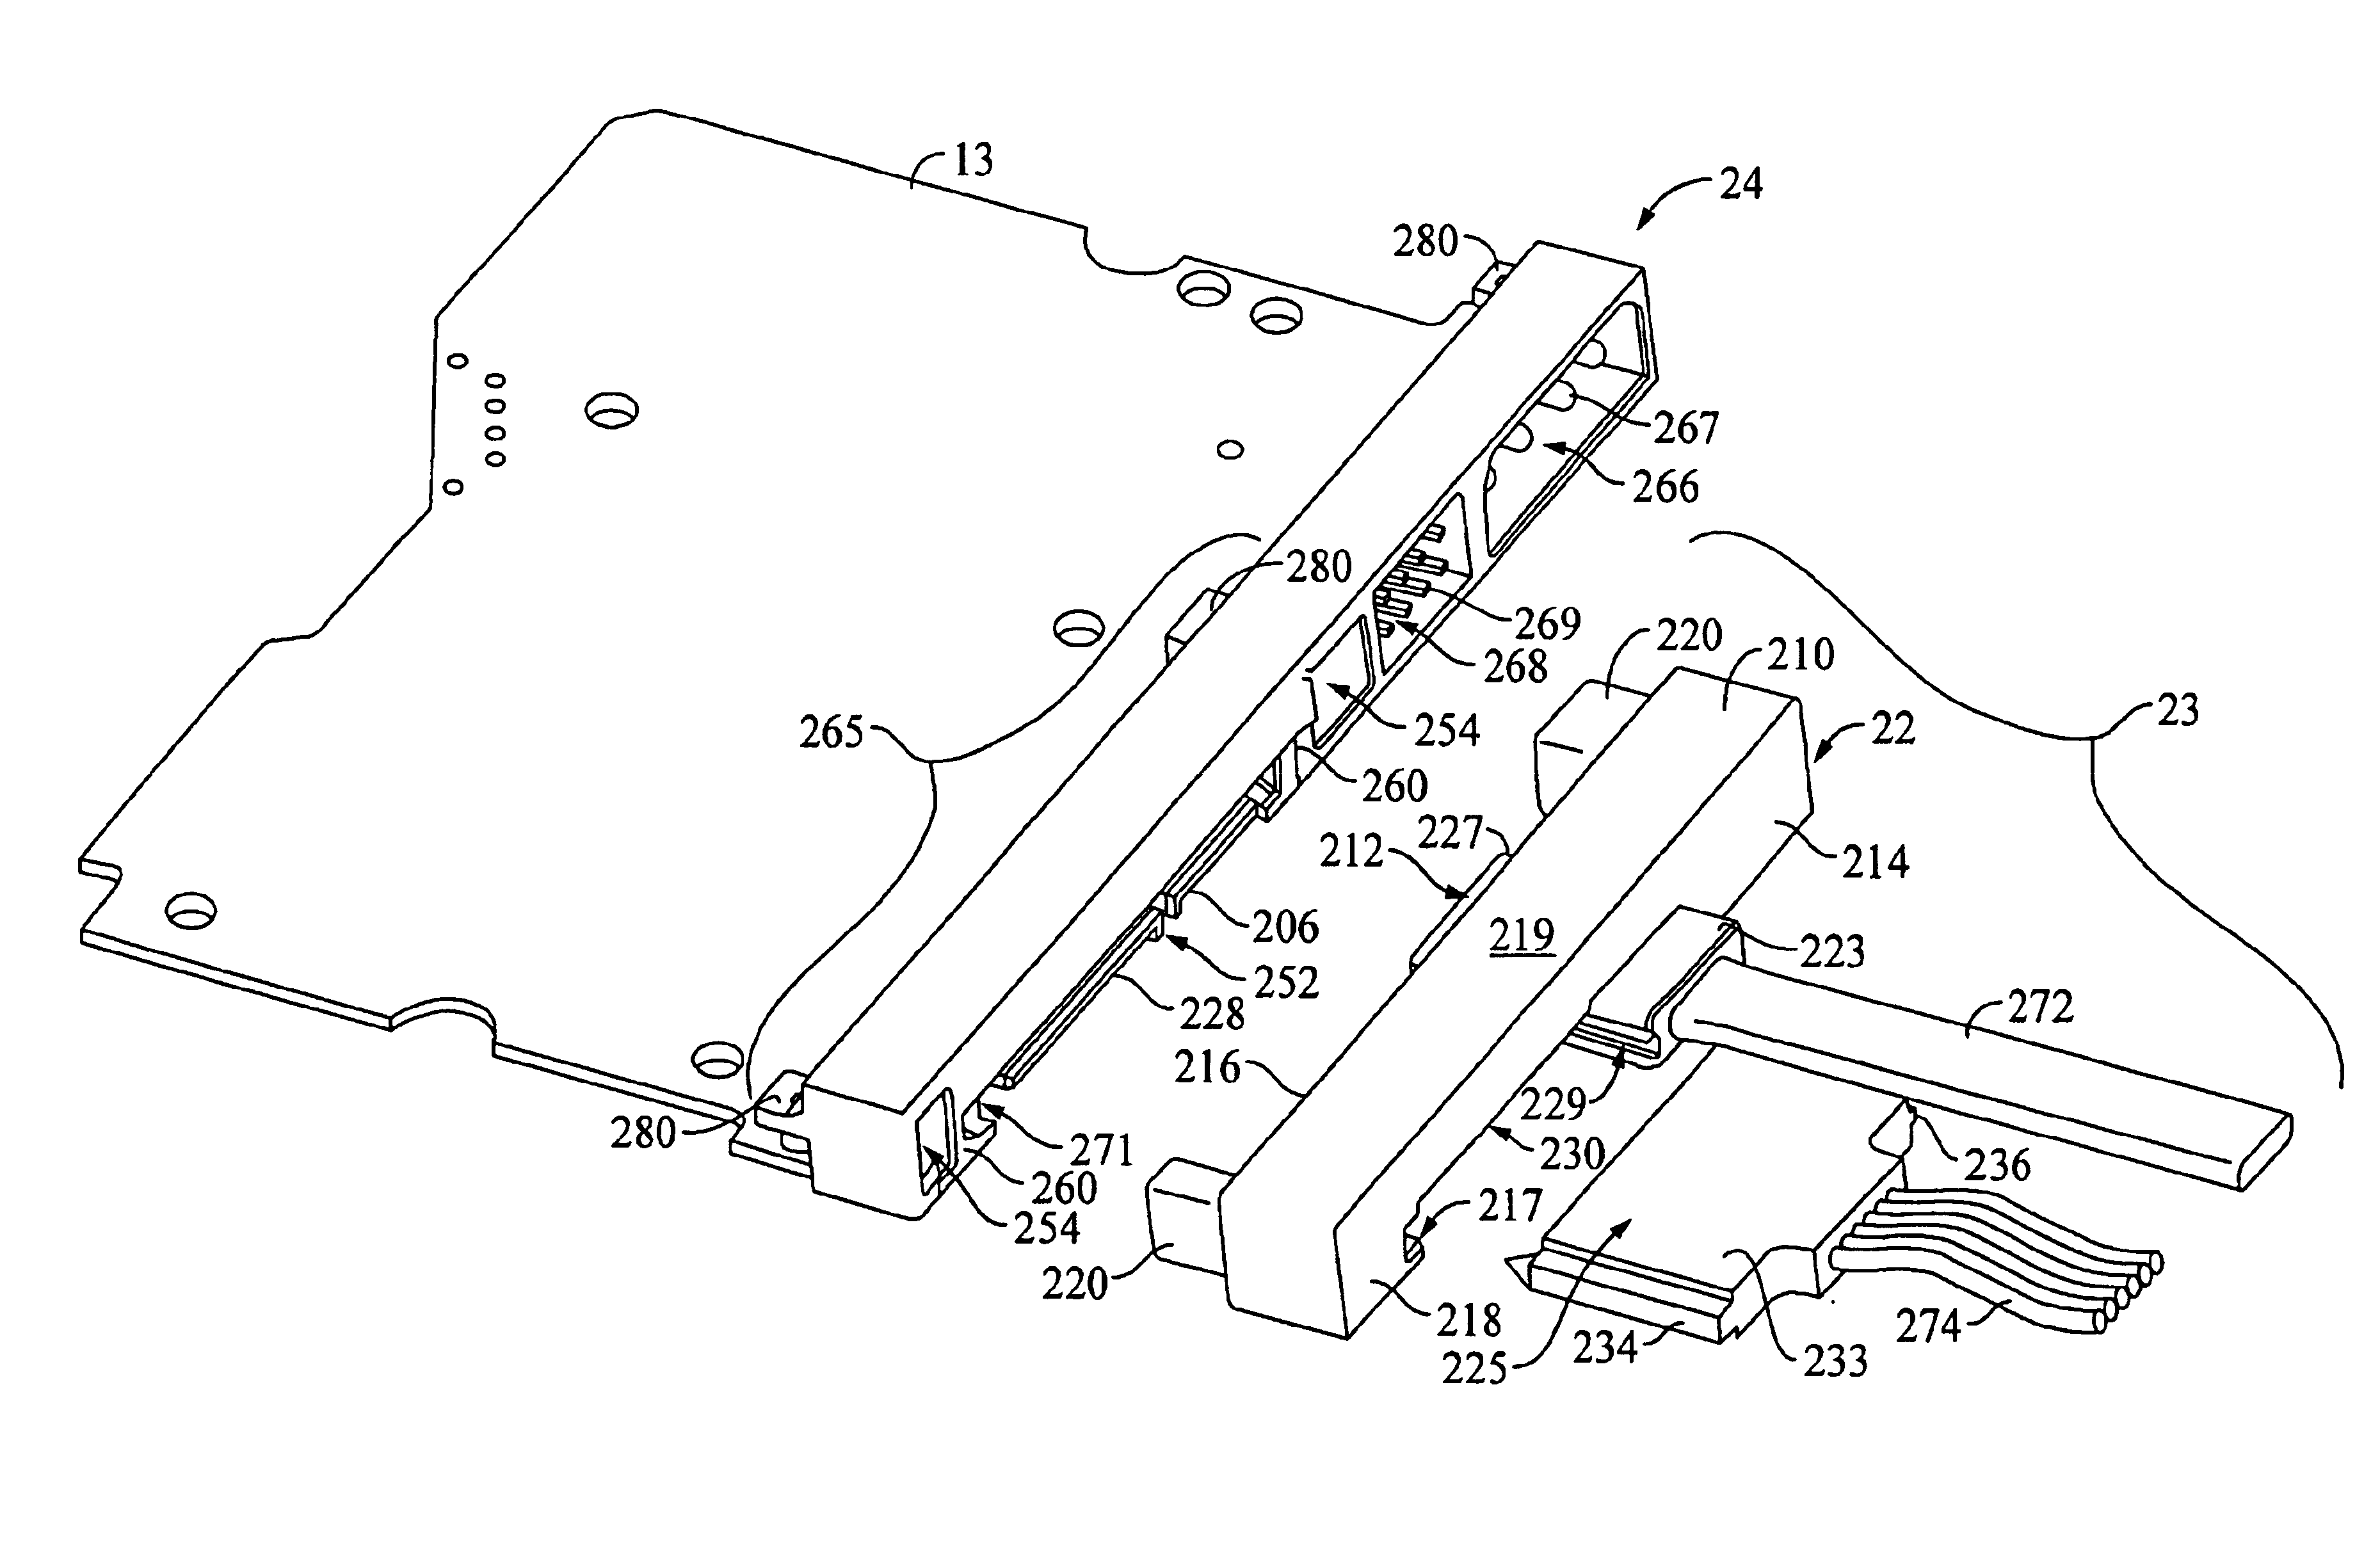 Storage peripheral having a robust serial advanced technology attachment (SATA) PCB connector